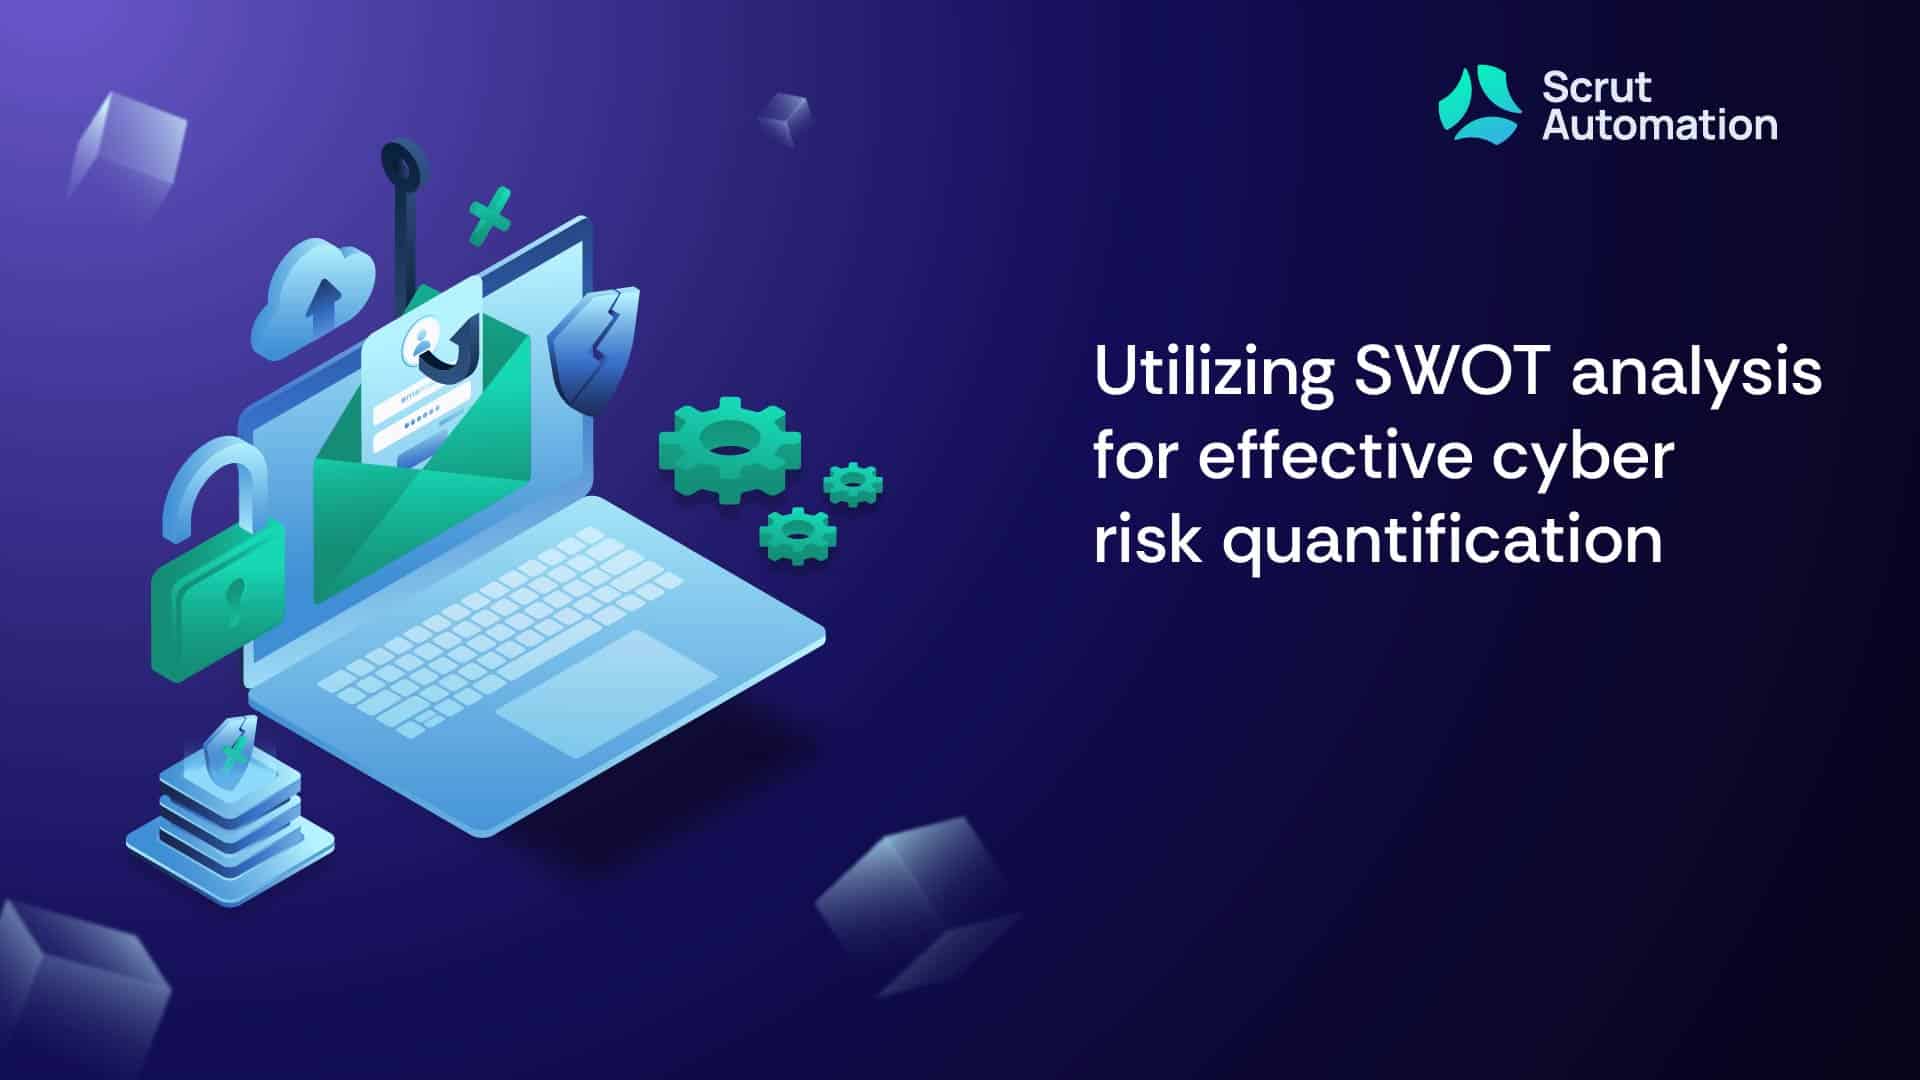 swot analysis for cyber risk quantification